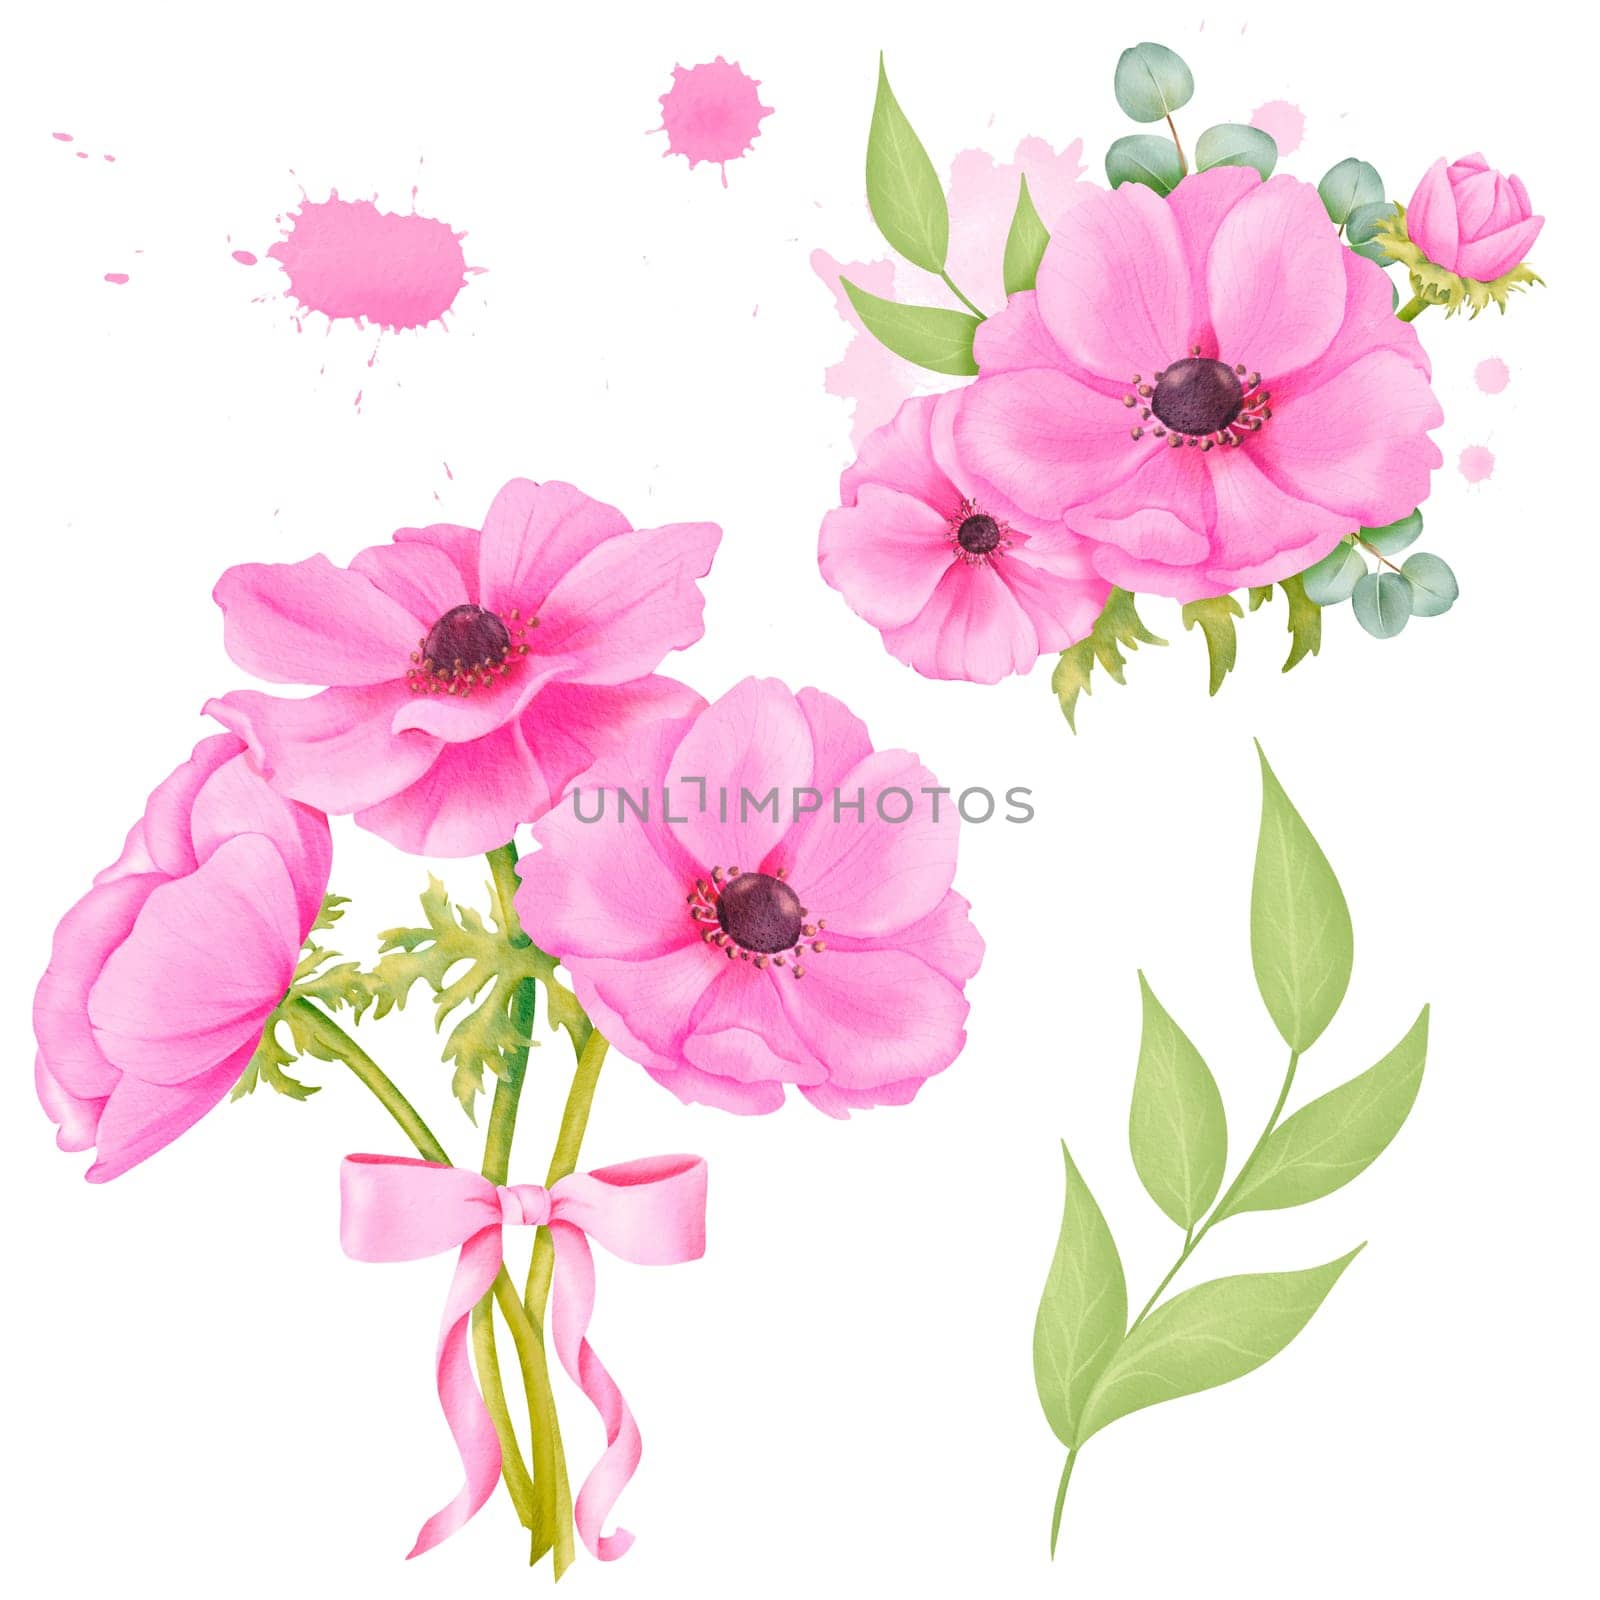 Watercolor set. a bouquet of pink anemones, a sprig of greenery, boutonniere, and floral-colored watercolor splashes. for stationery, wedding invitations, greeting cards, packaging design home decor by Art_Mari_Ka